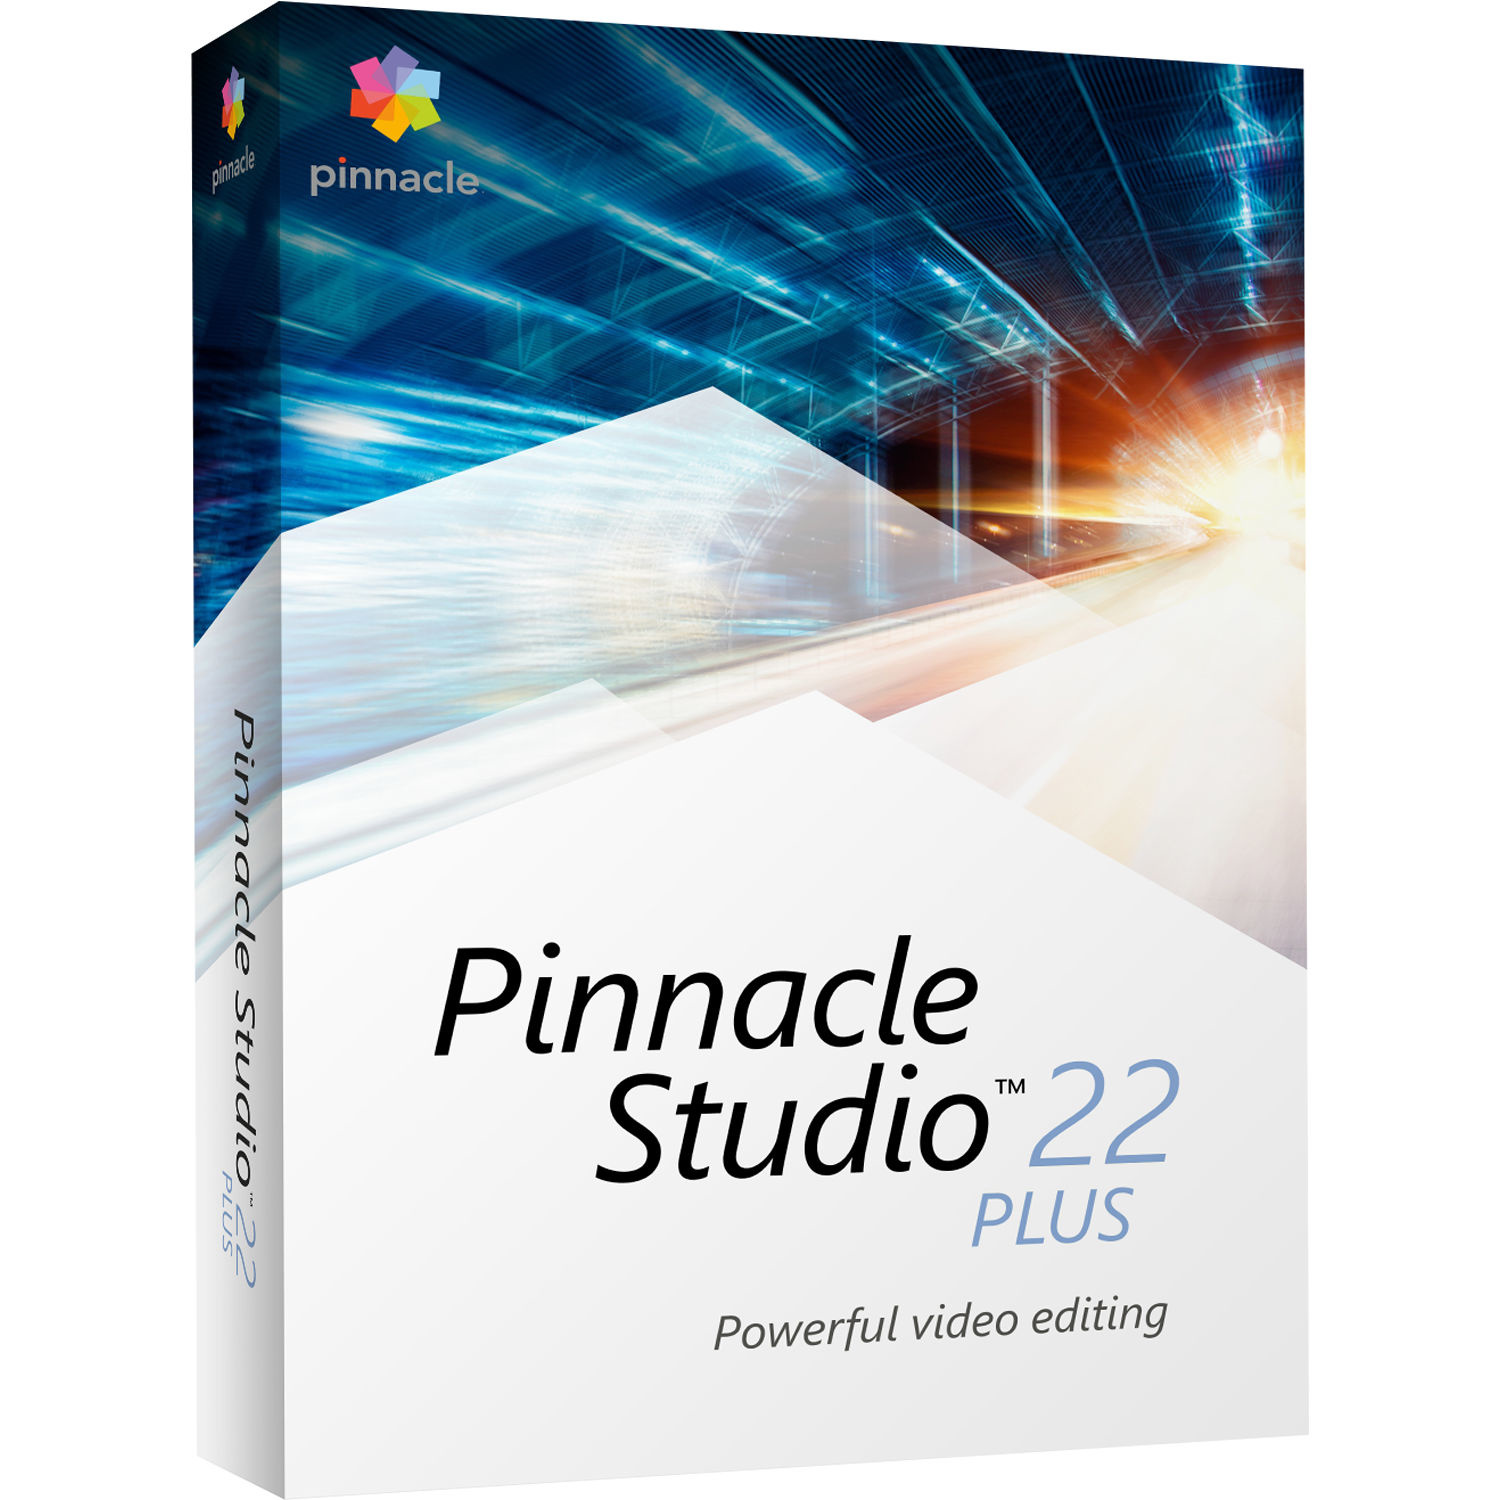 what can you do with pinnacle studio 22